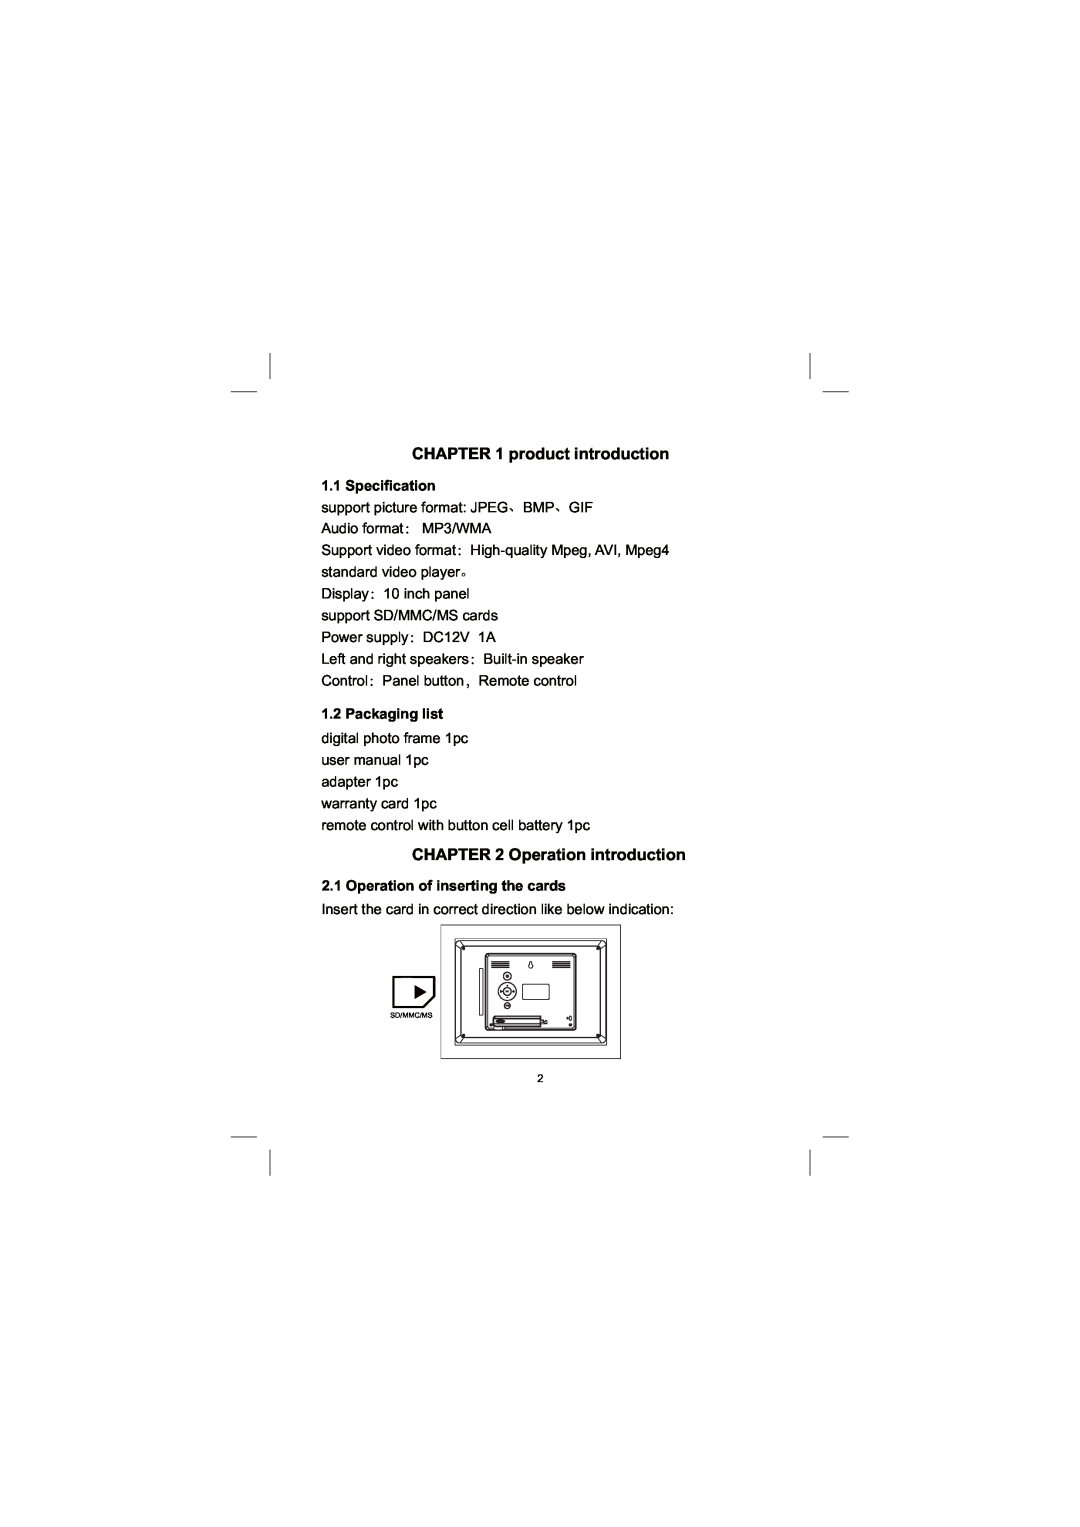 Sylvania SDPF1033 user manual Specification, Packaging list, Operation of inserting the cards, product introduction 